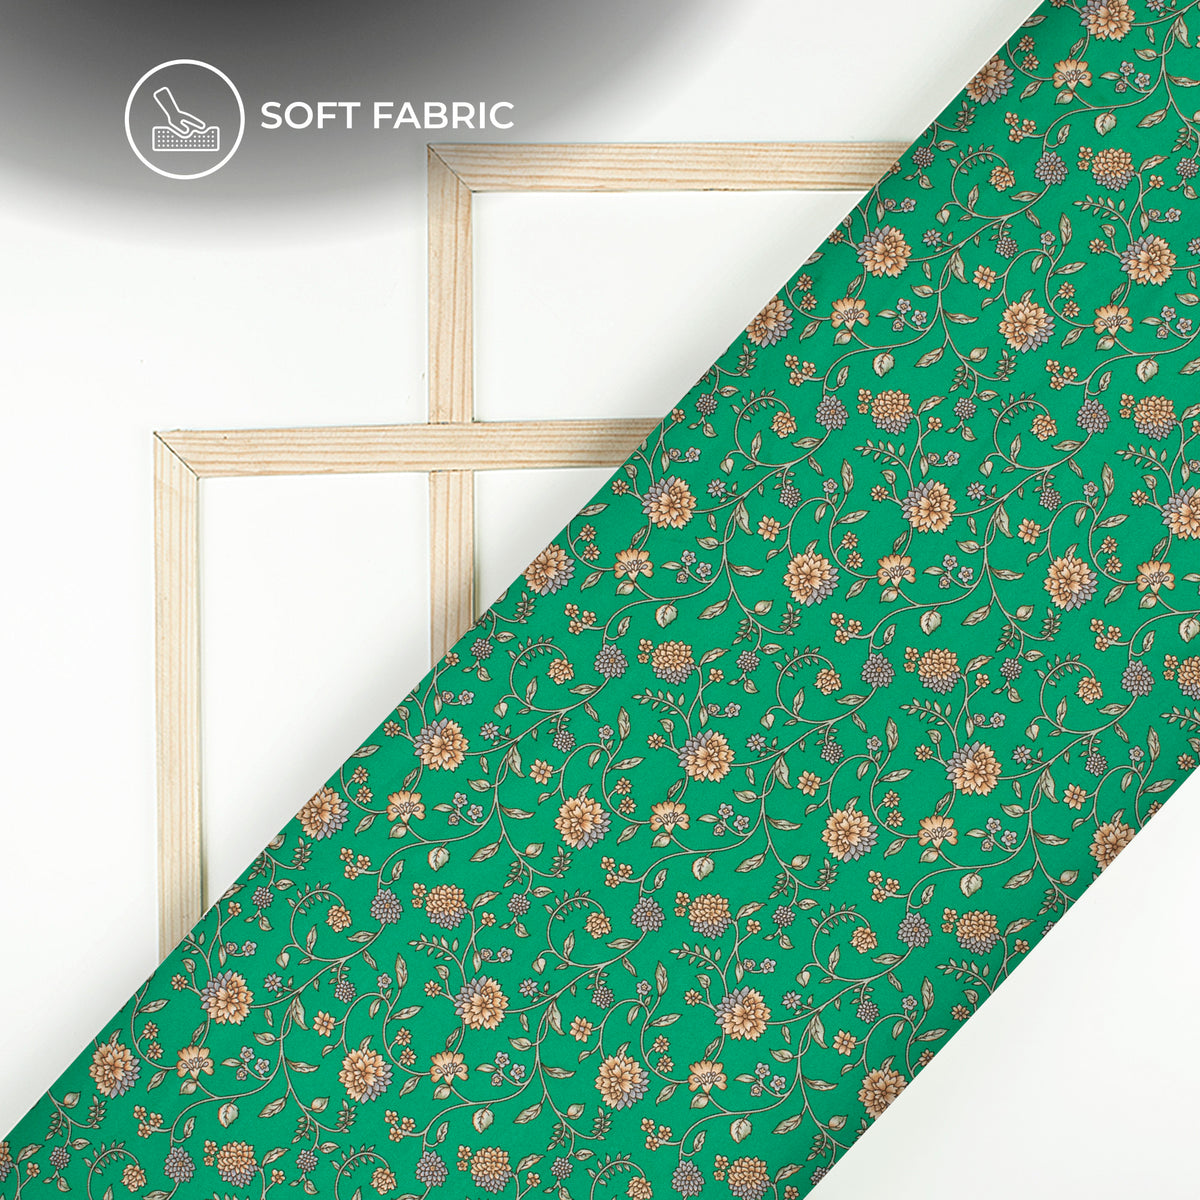 Green Floral Digital Print Butter Crepe Fabric